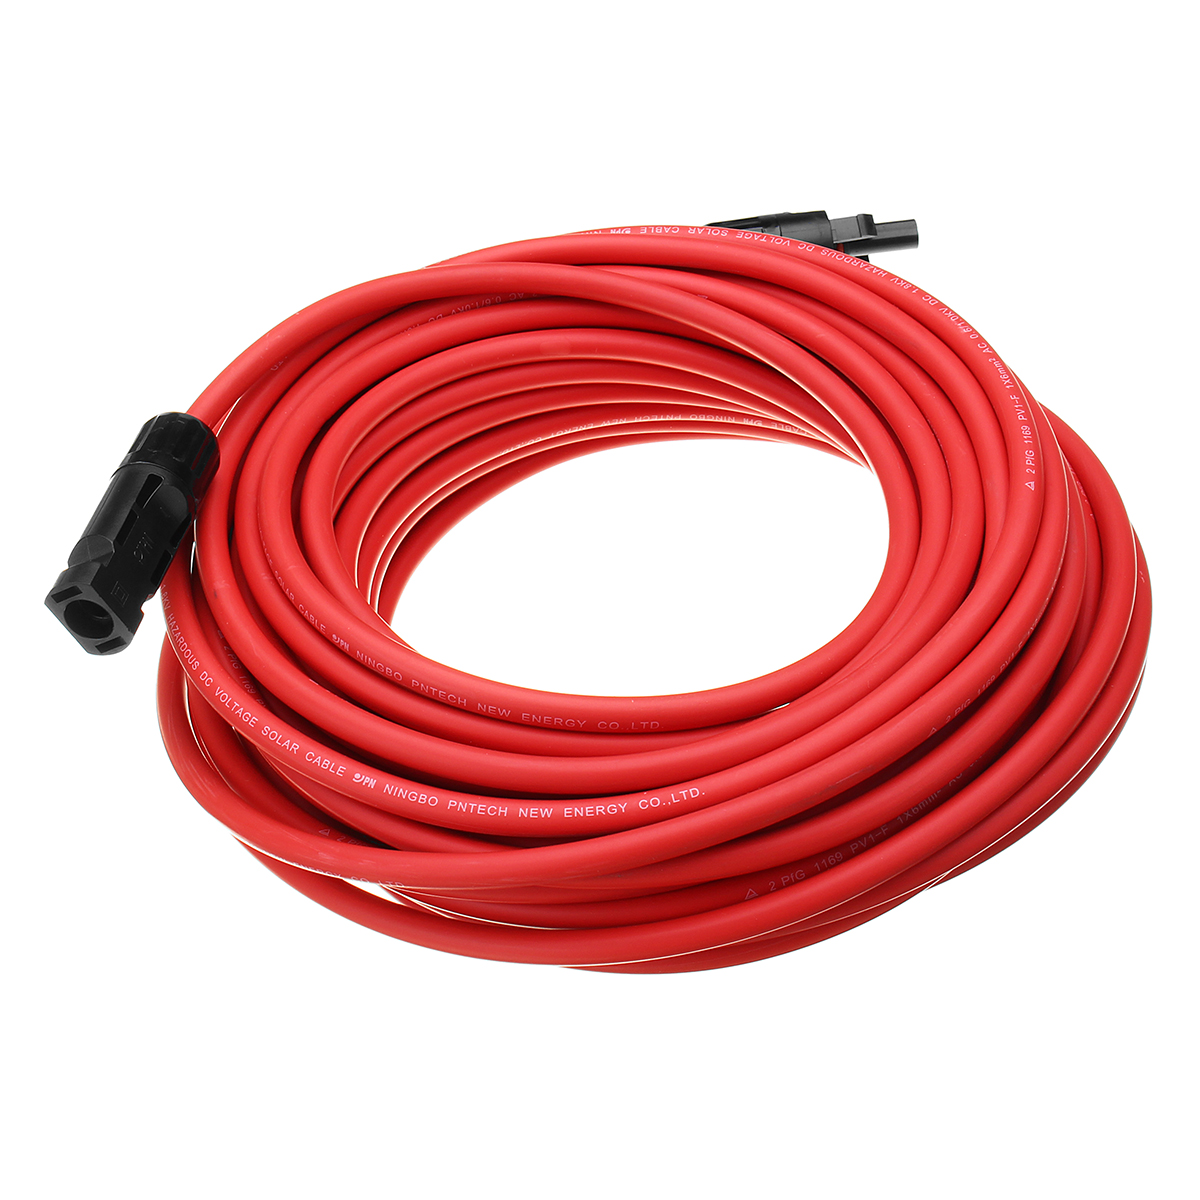 10-AWG-15-Meter-Solar-Panel-Extension-Cable-Wire-BlackRed-with-MC4-Connectors-1338753-7